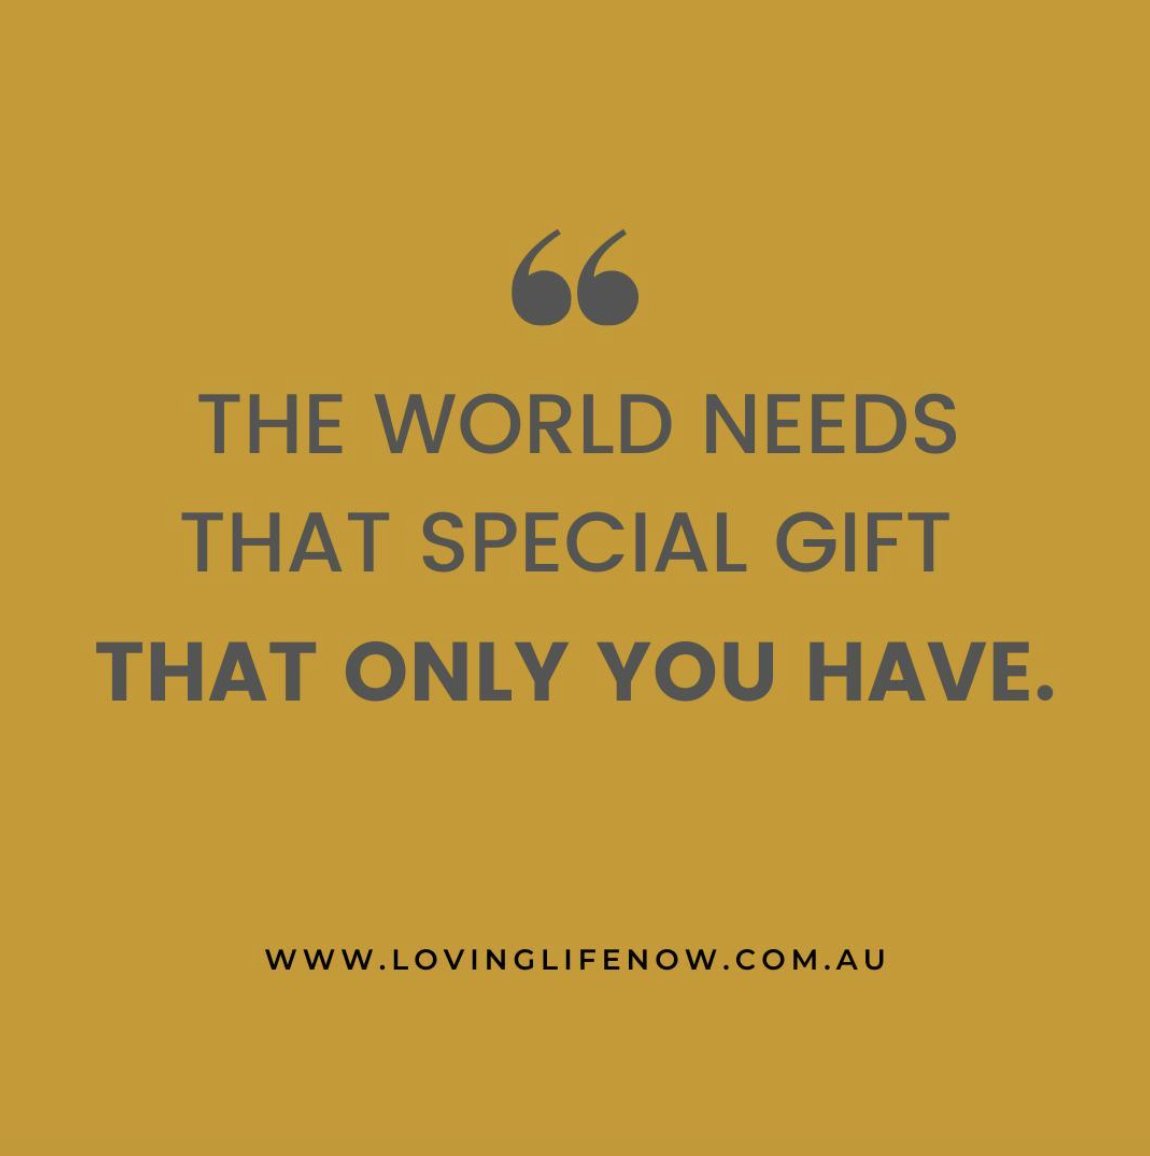 The World needs that special gift that only you have
-
-
#LivingLovingLife
#OnlineIncomeOpportunity #WorkFromAnywhere #OnlineBusinessSolution
#SimonAndLeeAnne #LifestyleLoveAndBeyond
#LaptopLifestyle #PortableOnlineBusiness
#SimonHaggard #LeeAnneHaggard #LovingLifeNow